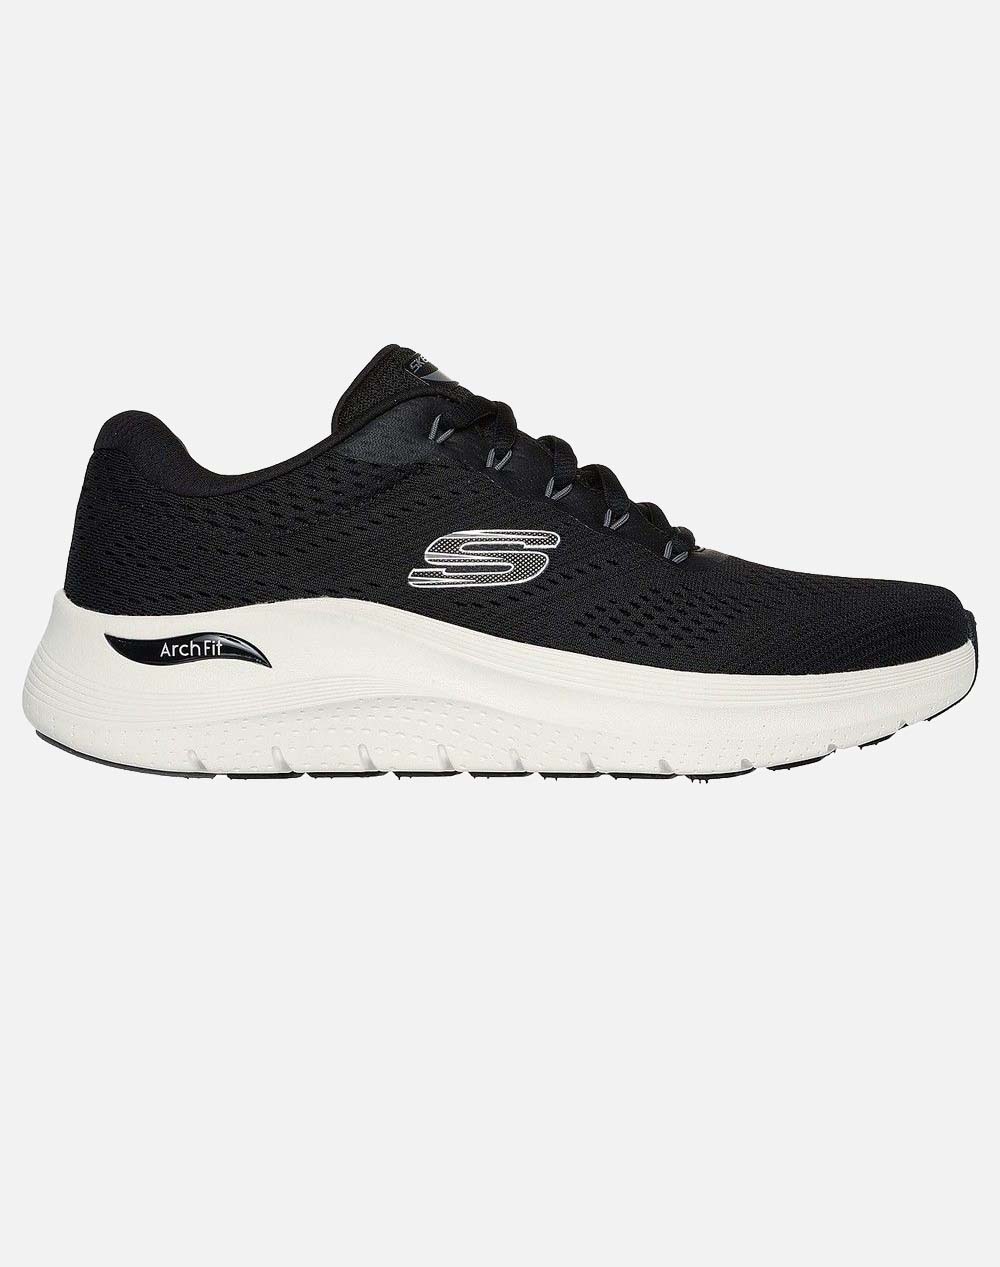 SKECHERS Arch Fit Engineered Mesh Lace Up 232700_BKW-BKW Black